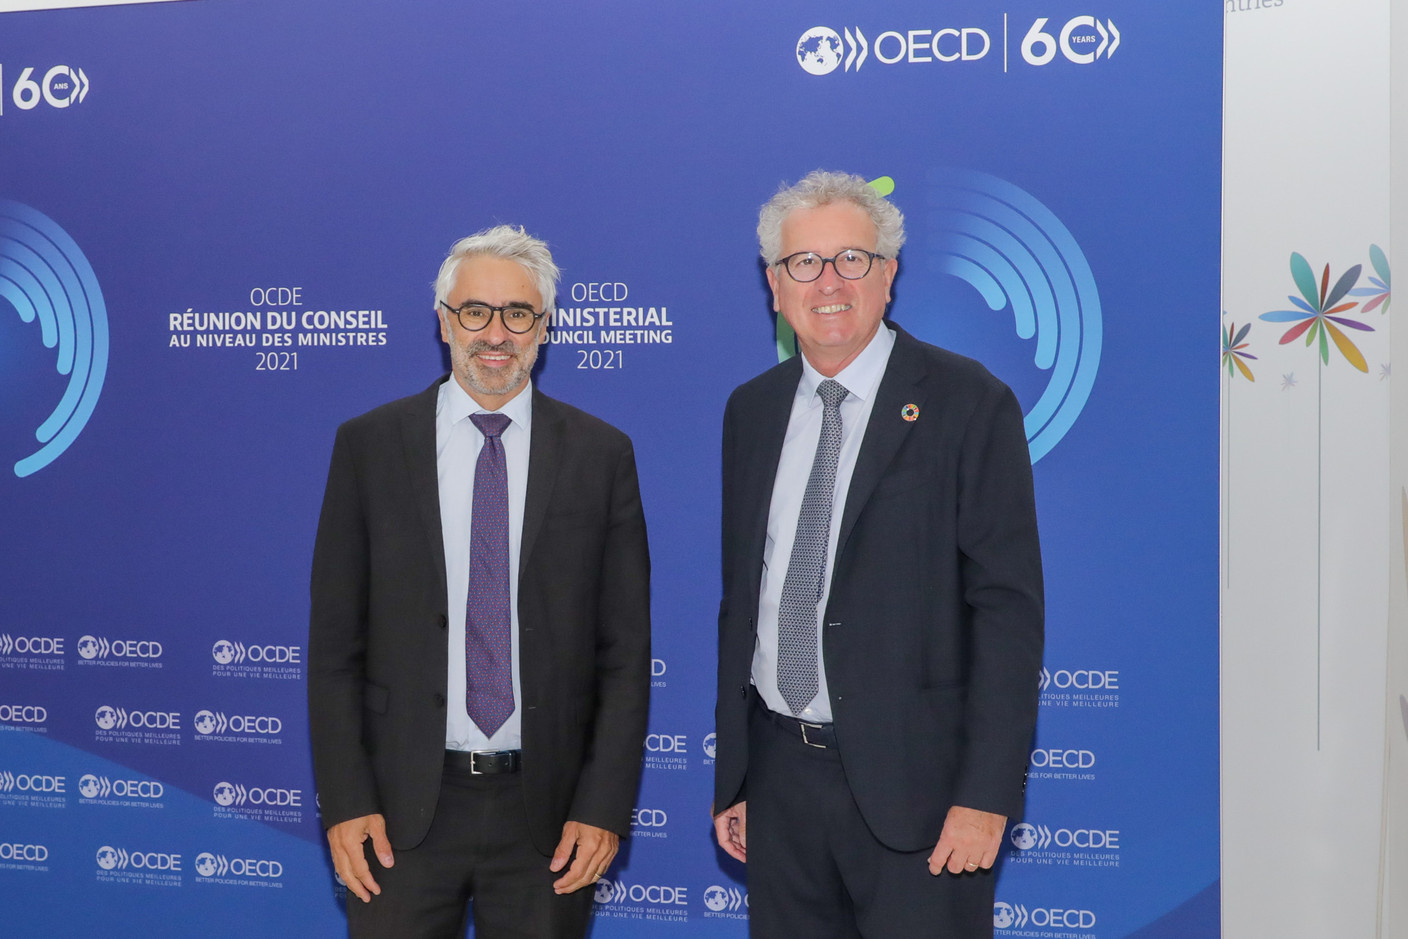 (from left to right) Pascal Saint-Amans, Director of the Centre for Tax Policy and Administration (CTPA); Pierre Gramegna, Minister of Finance SIP/LUC DEFLORENNE